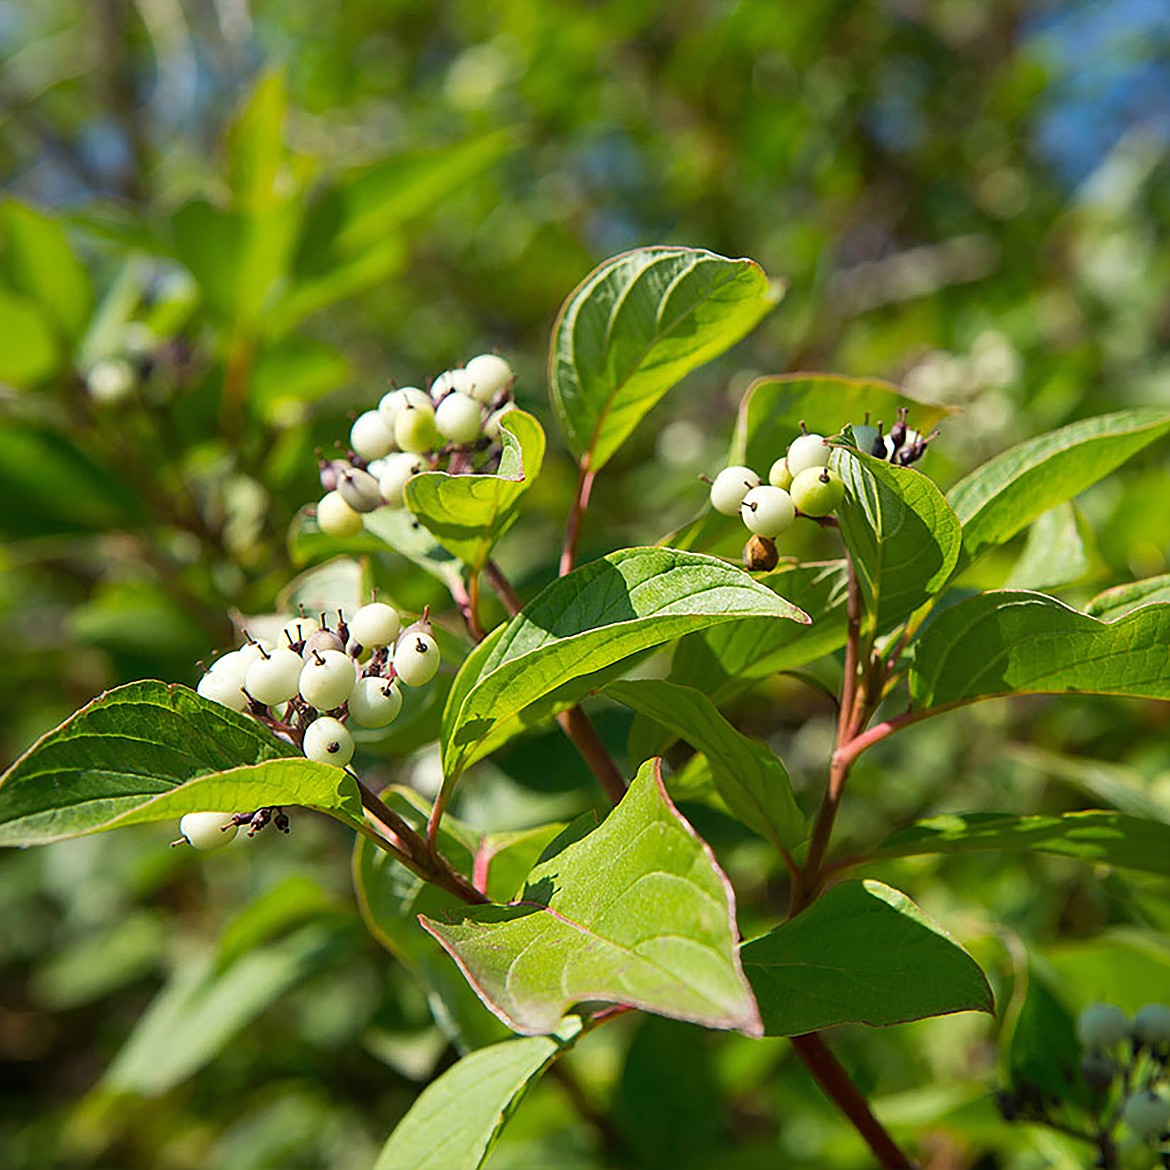 The berries of the red osier dogwood (cornus sericea) are pictured.